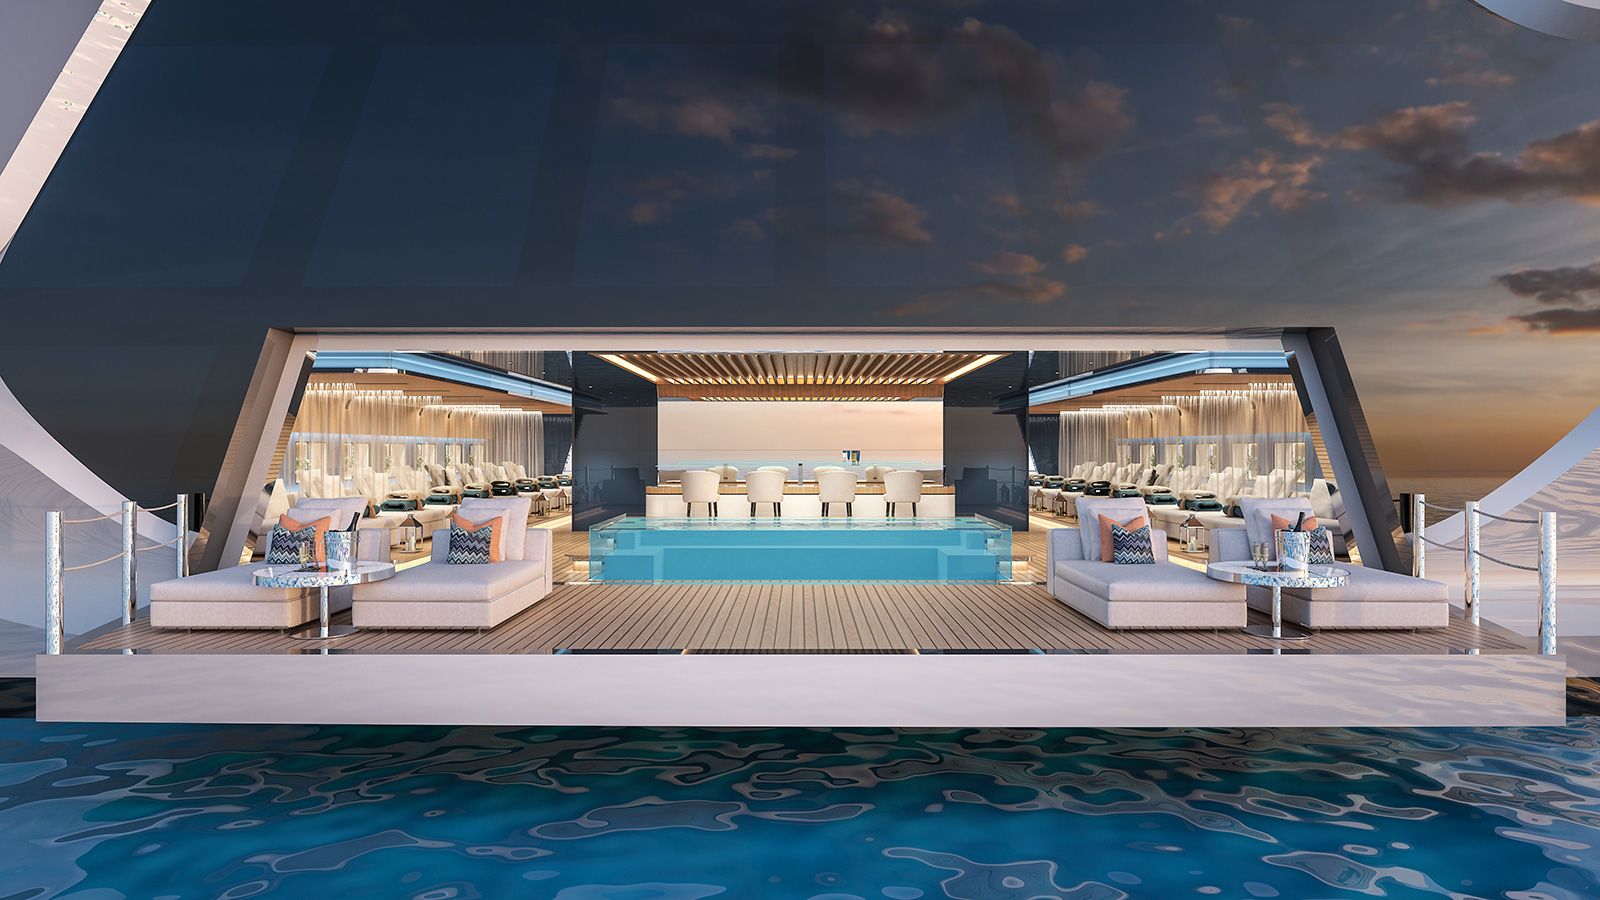 <strong>Lavish vessel:</strong> A luxurious open beach club based on the Royal Palace of Caserta, a former royal residence in southern Italy created by the Bourbon king Charles III as a rival to Versailles, is among its many highlights.